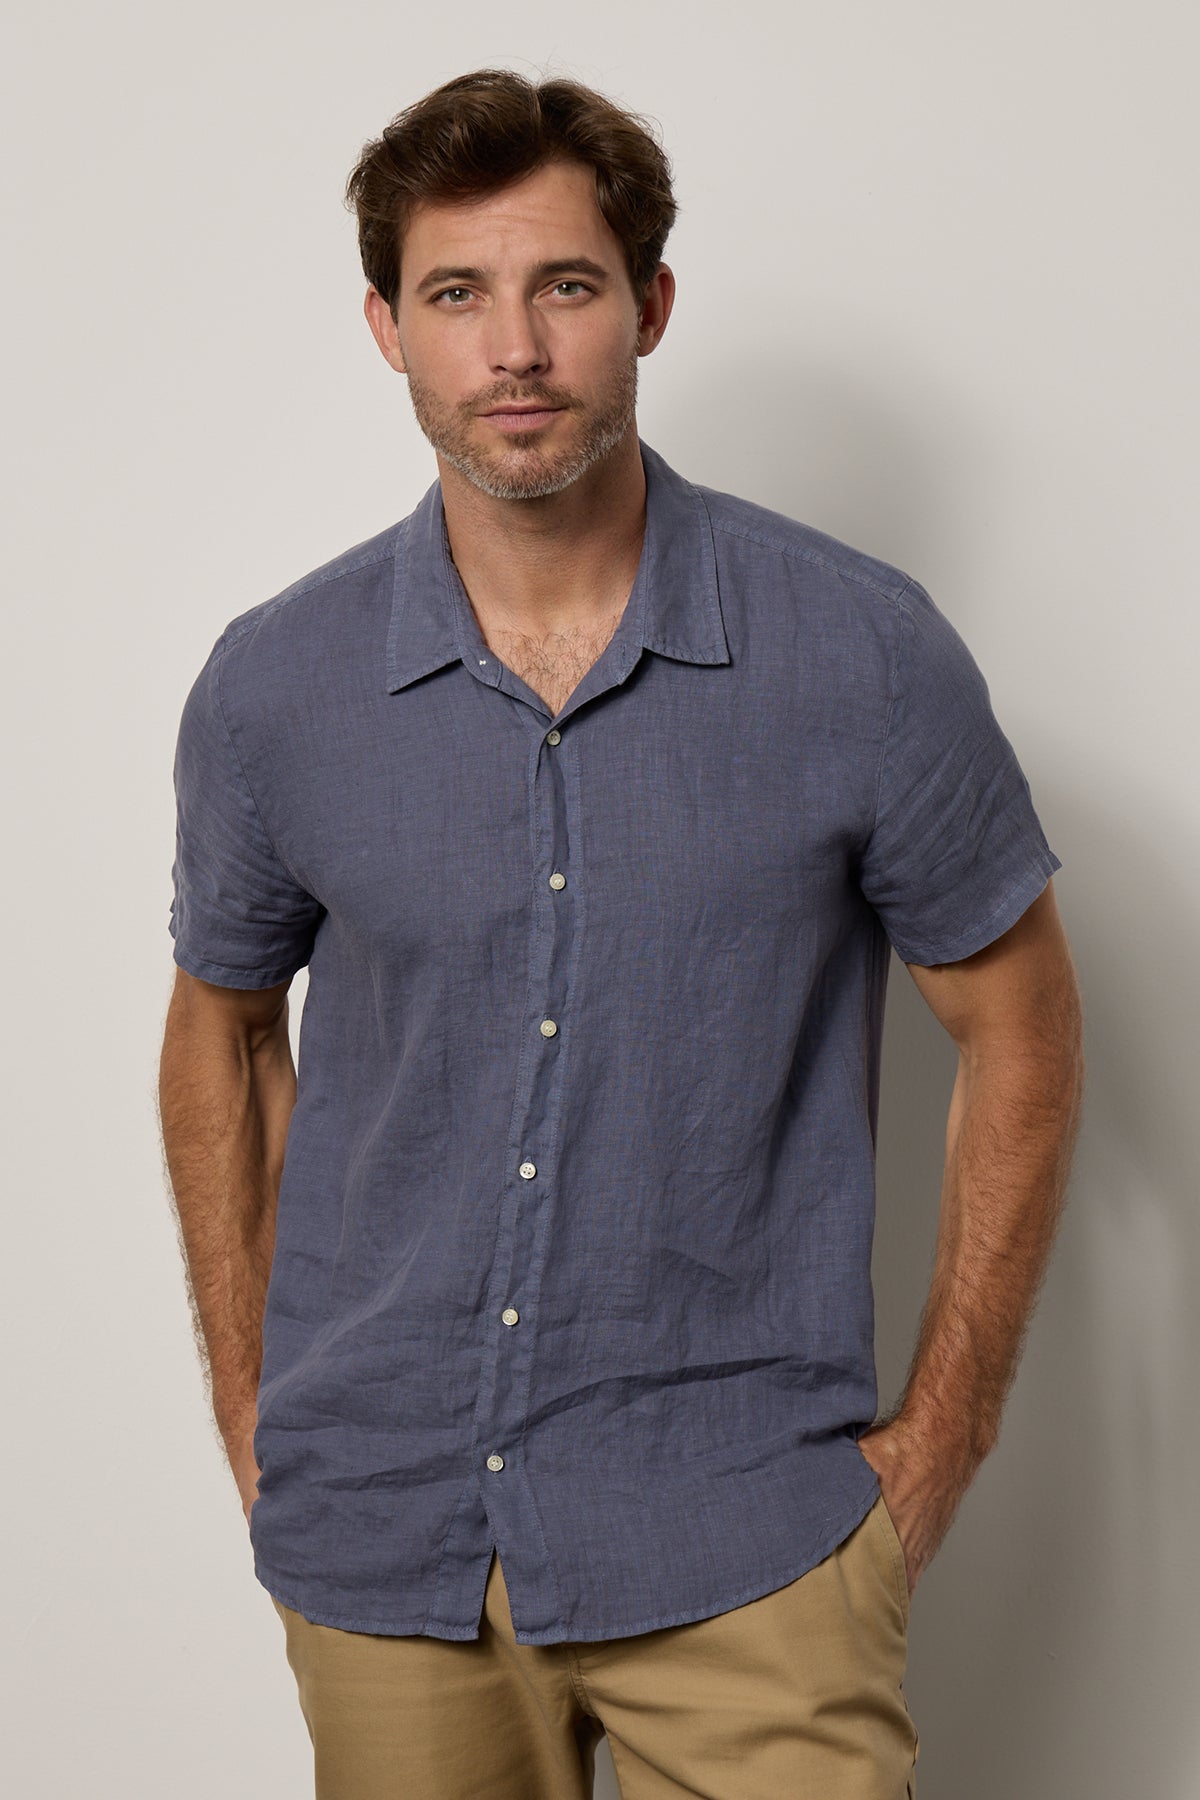   Mackie Button-Up Shirt in baltic blue linen with khaki pants front 